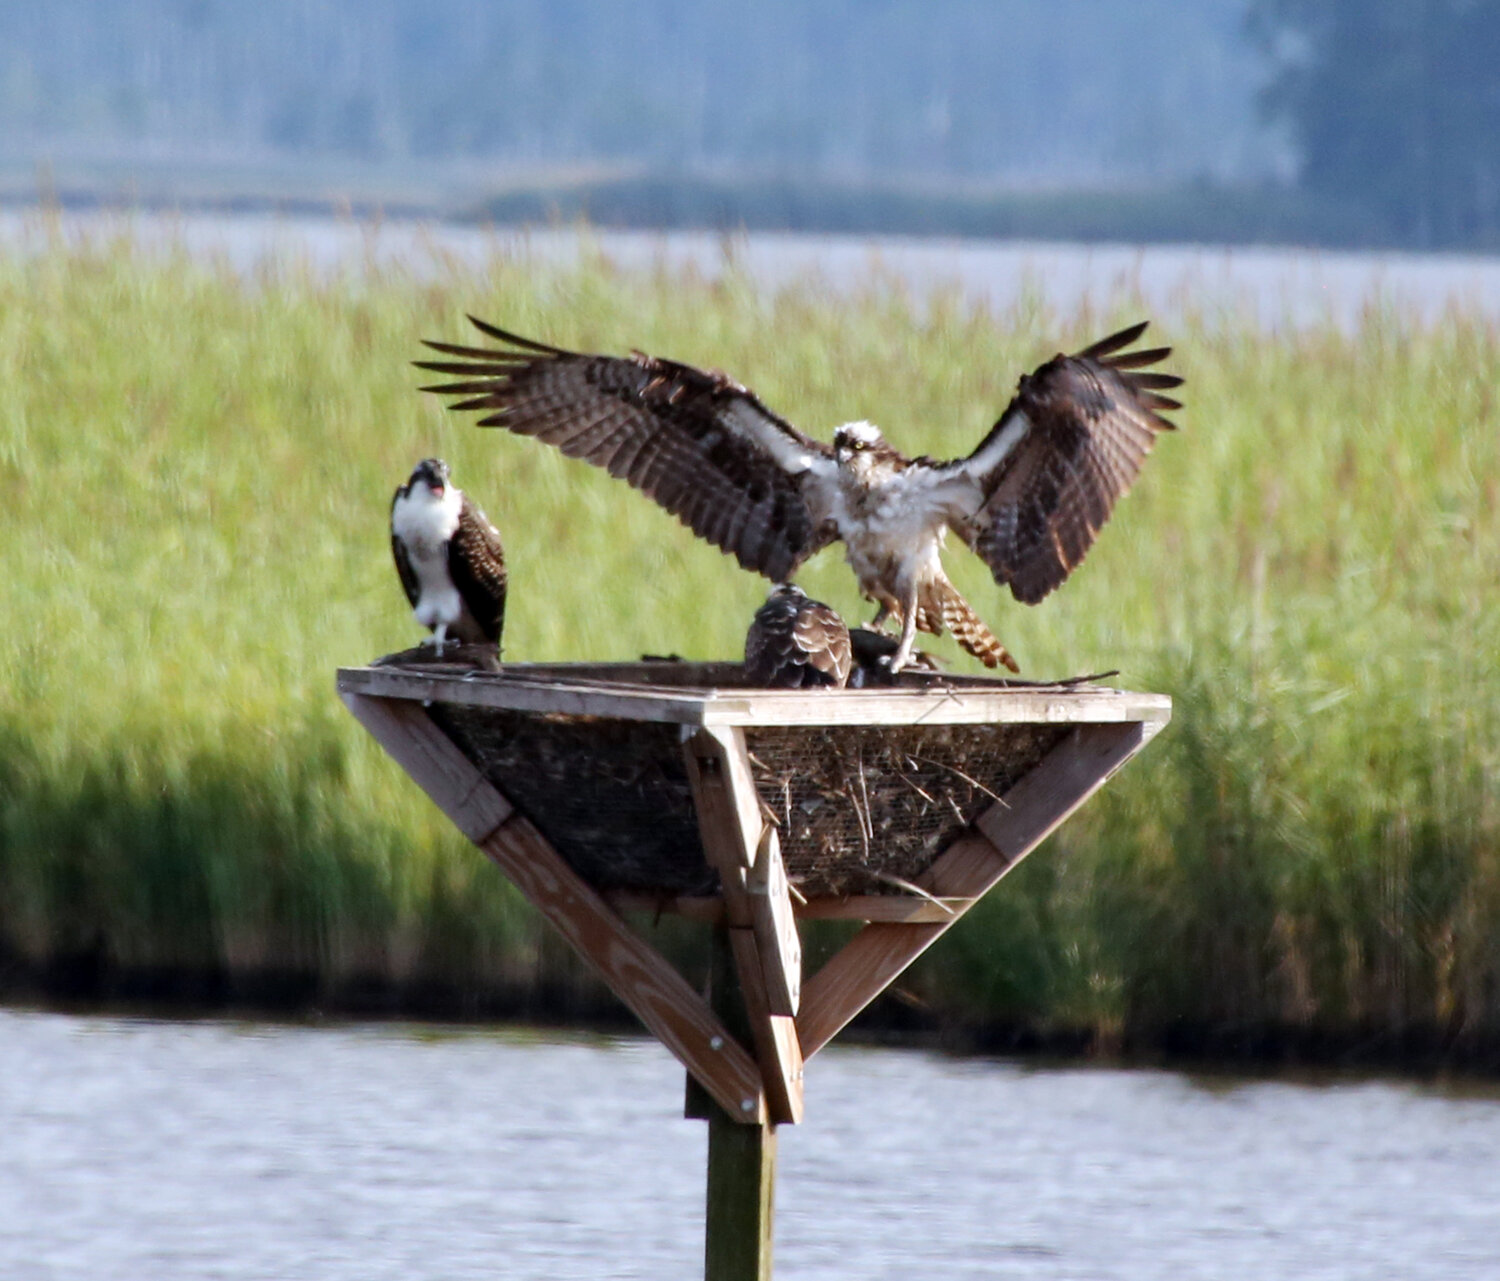 An osprey treats his family to a fish at the Blackwater National Wildlife Refuge in Dorchester County, Maryland.